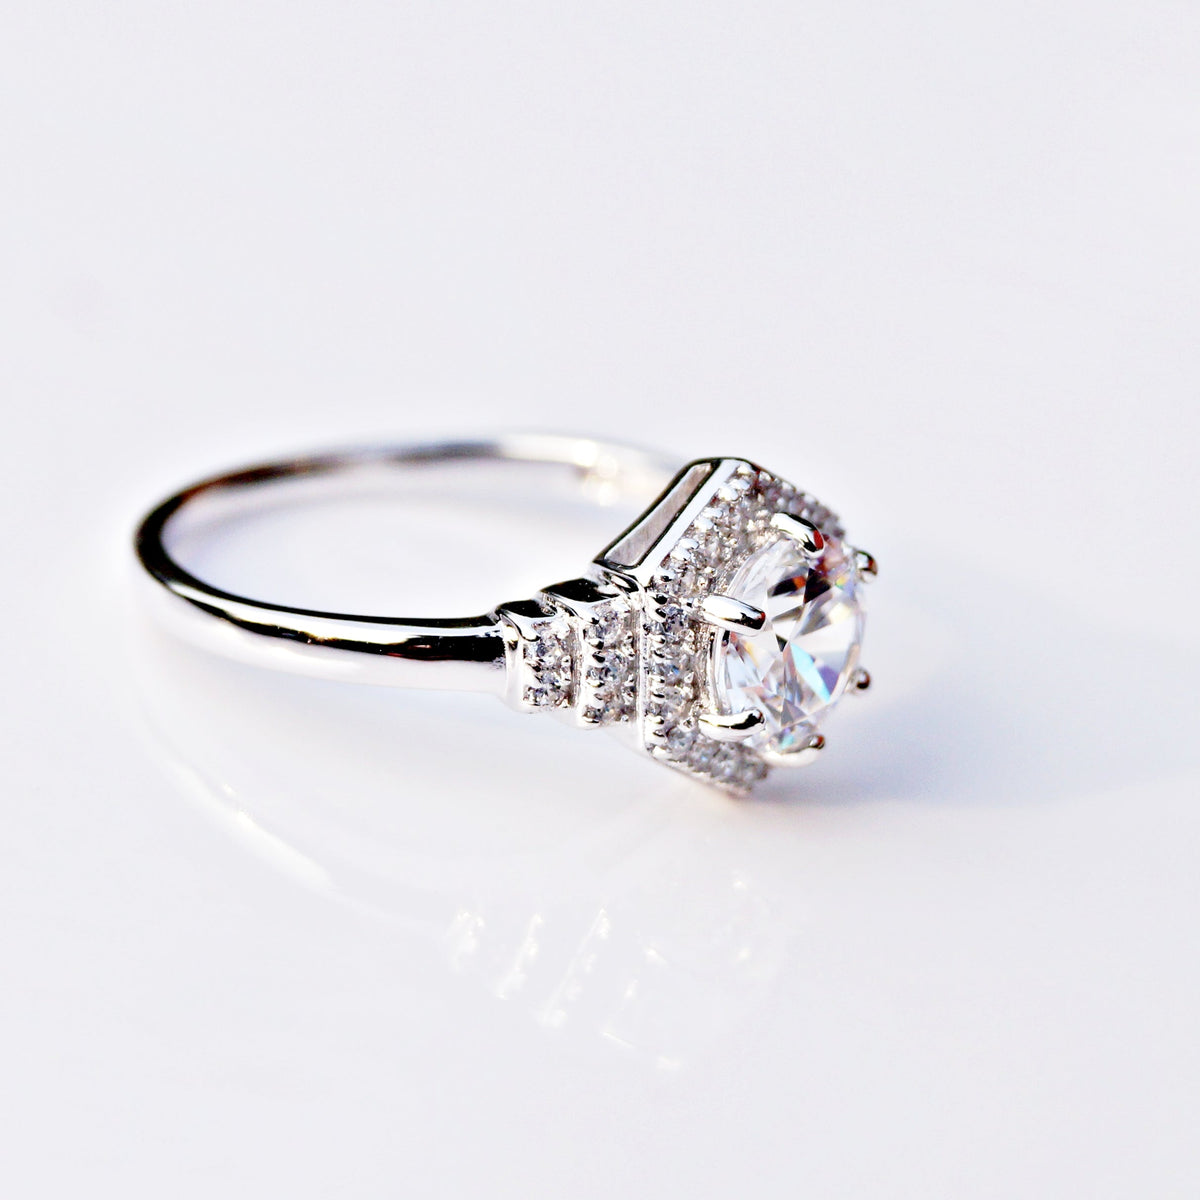 The Hexagon Solitaire Ring